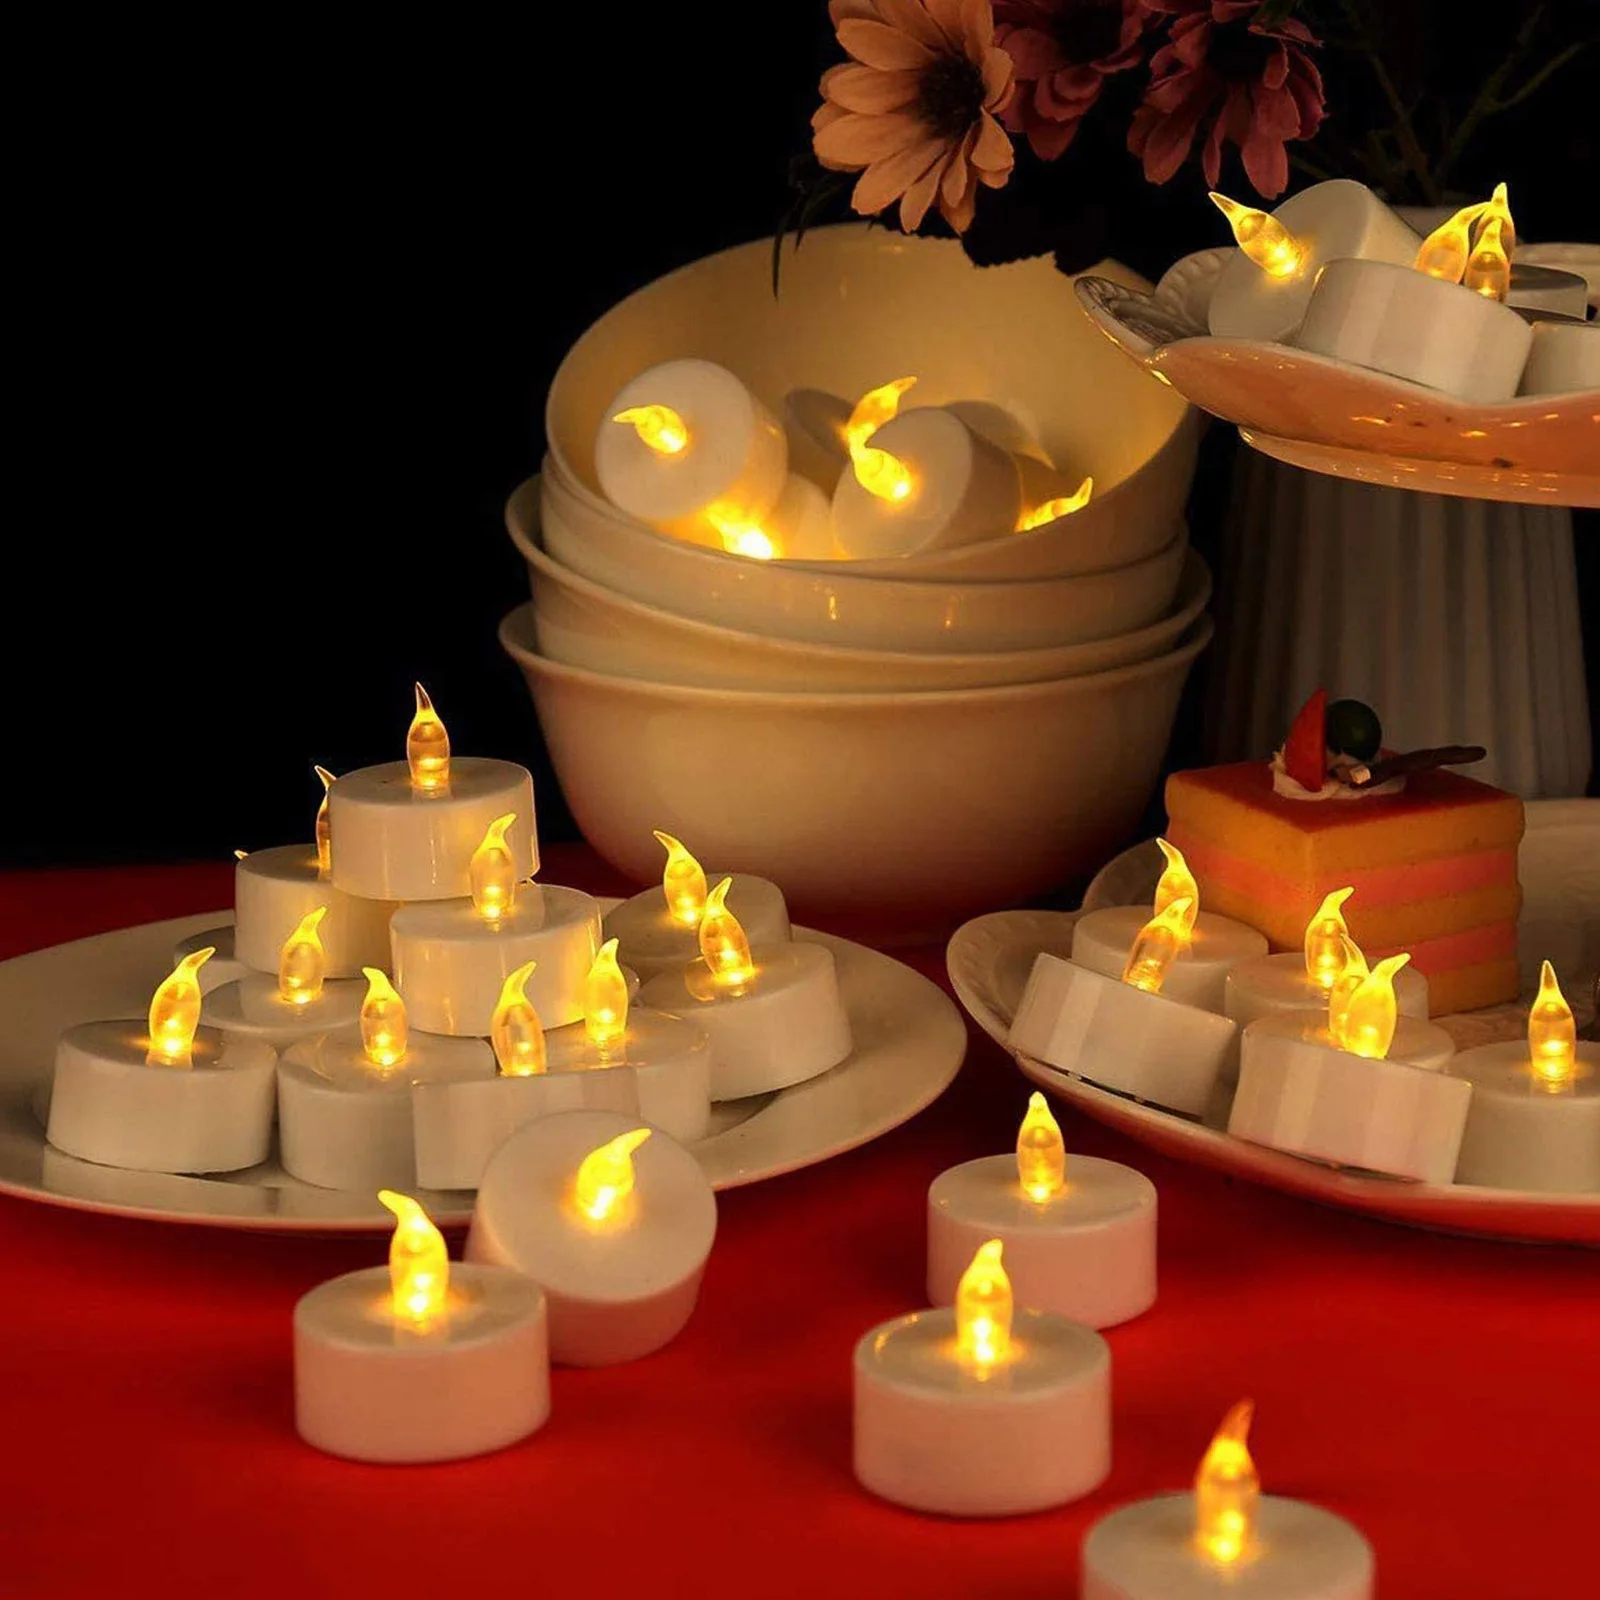 

1pcs Flameless LED Candles Lights Realistic Romantic Festive Atmosphere Tealight Candles Home Holiday Party Decorations Lighting